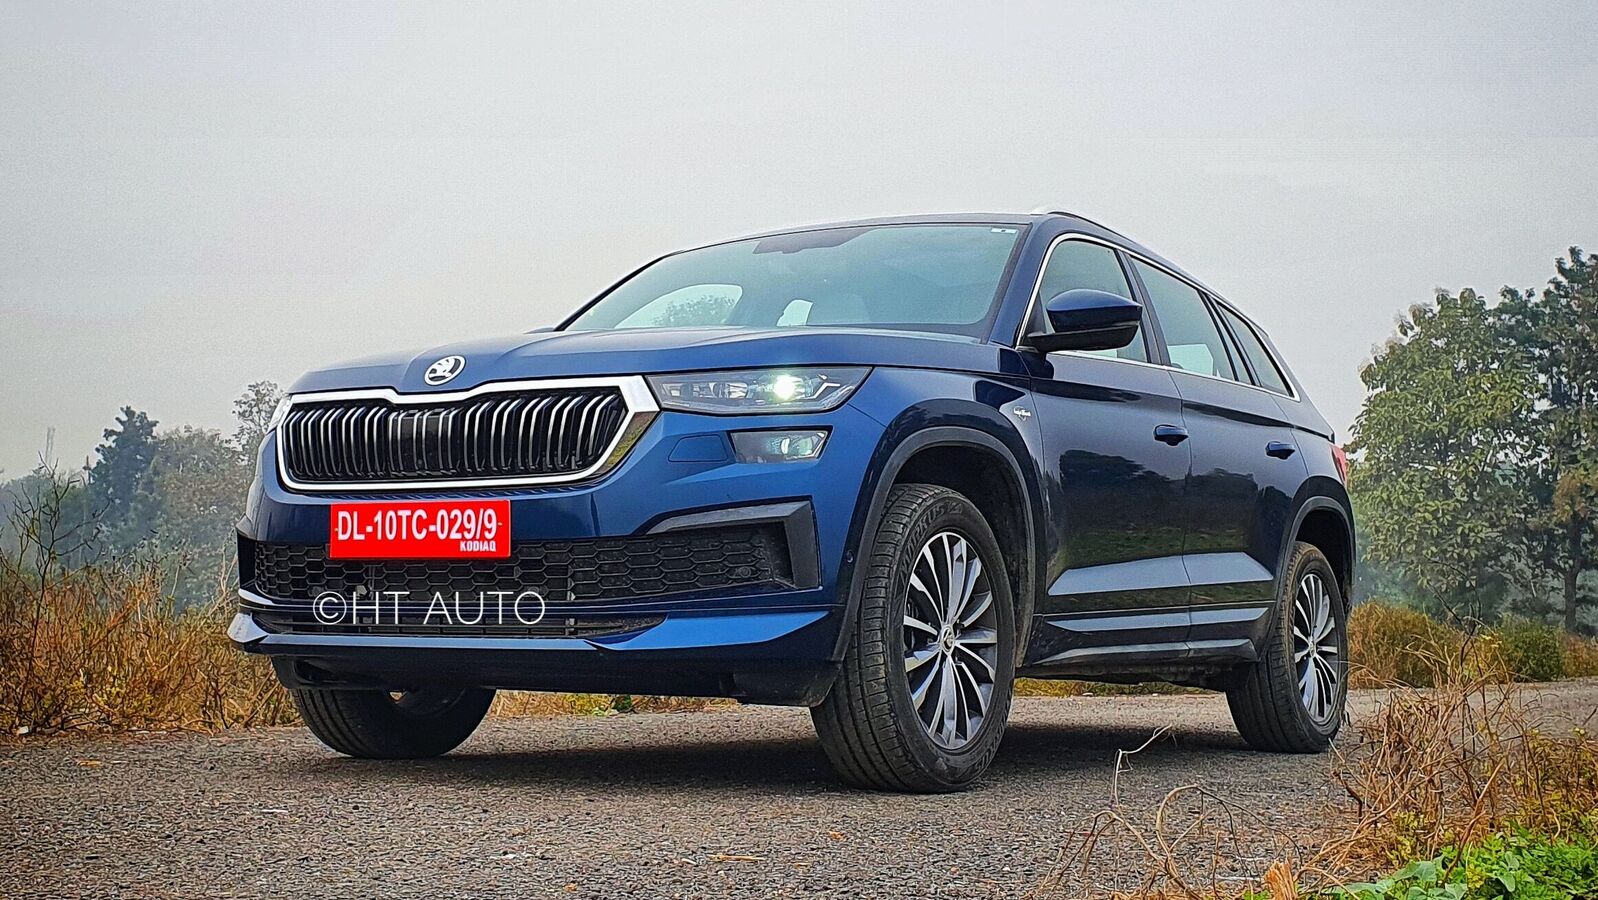 Skoda Kodiaq Booking : Skoda Kodiaq Booking For Q1 2023 Reopened Now With  Revised Prices